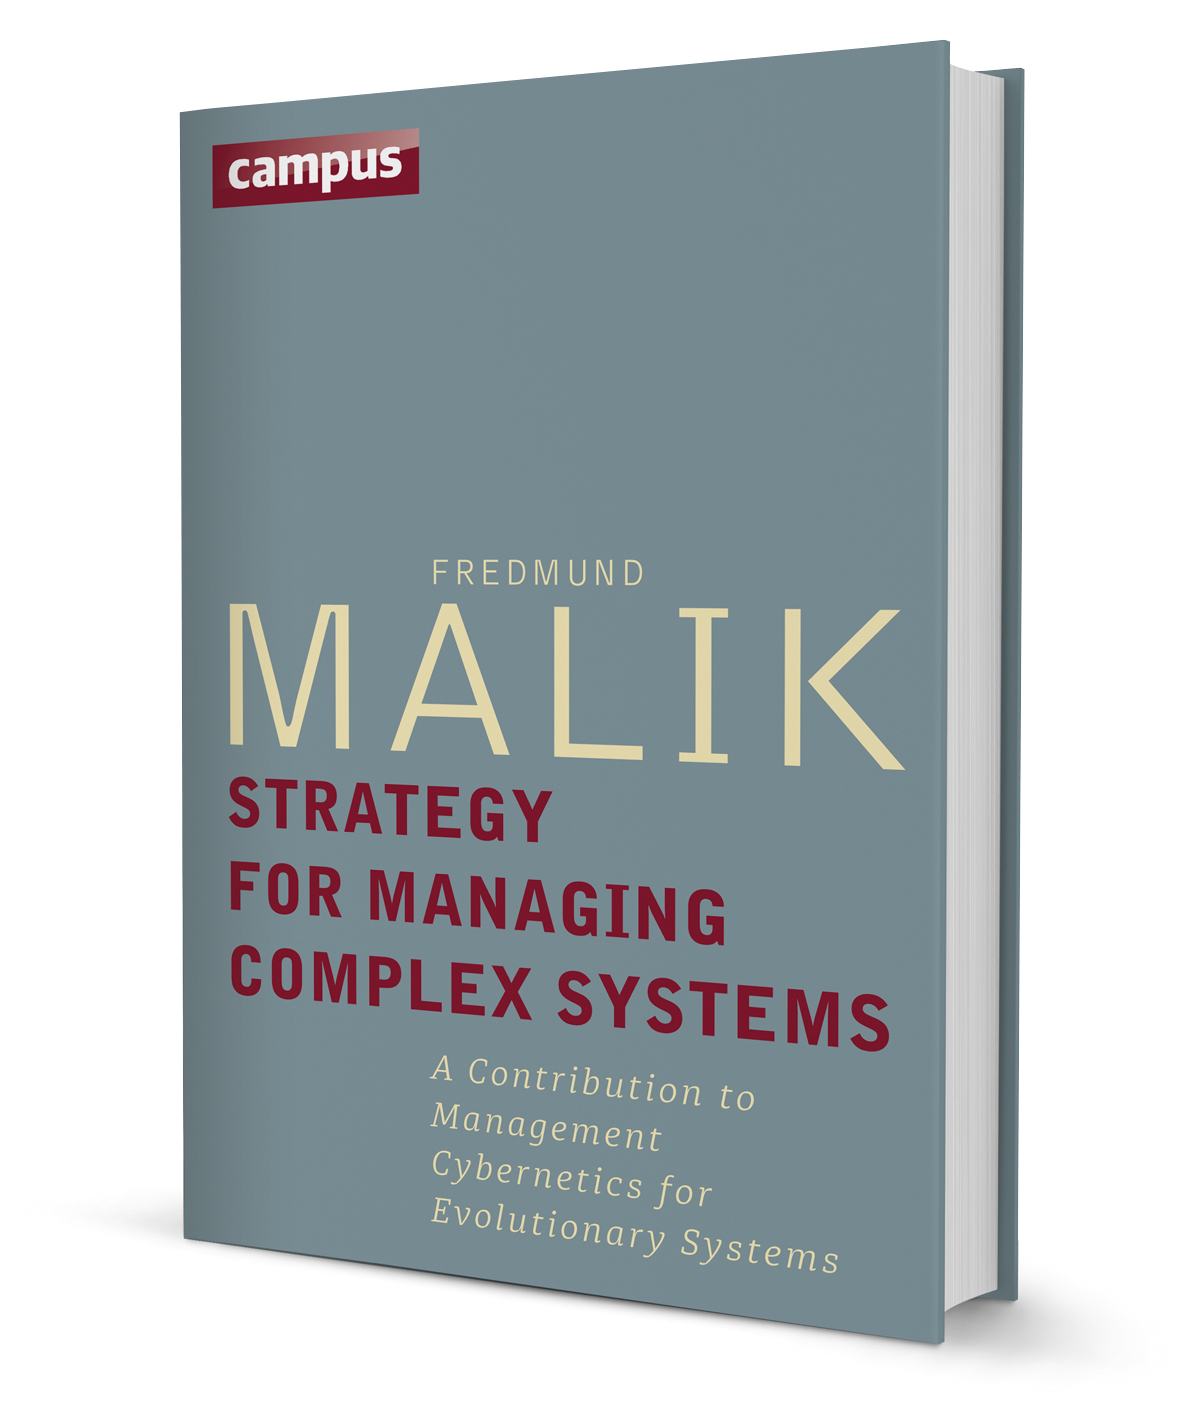 Strategy for Managing Complex Systems